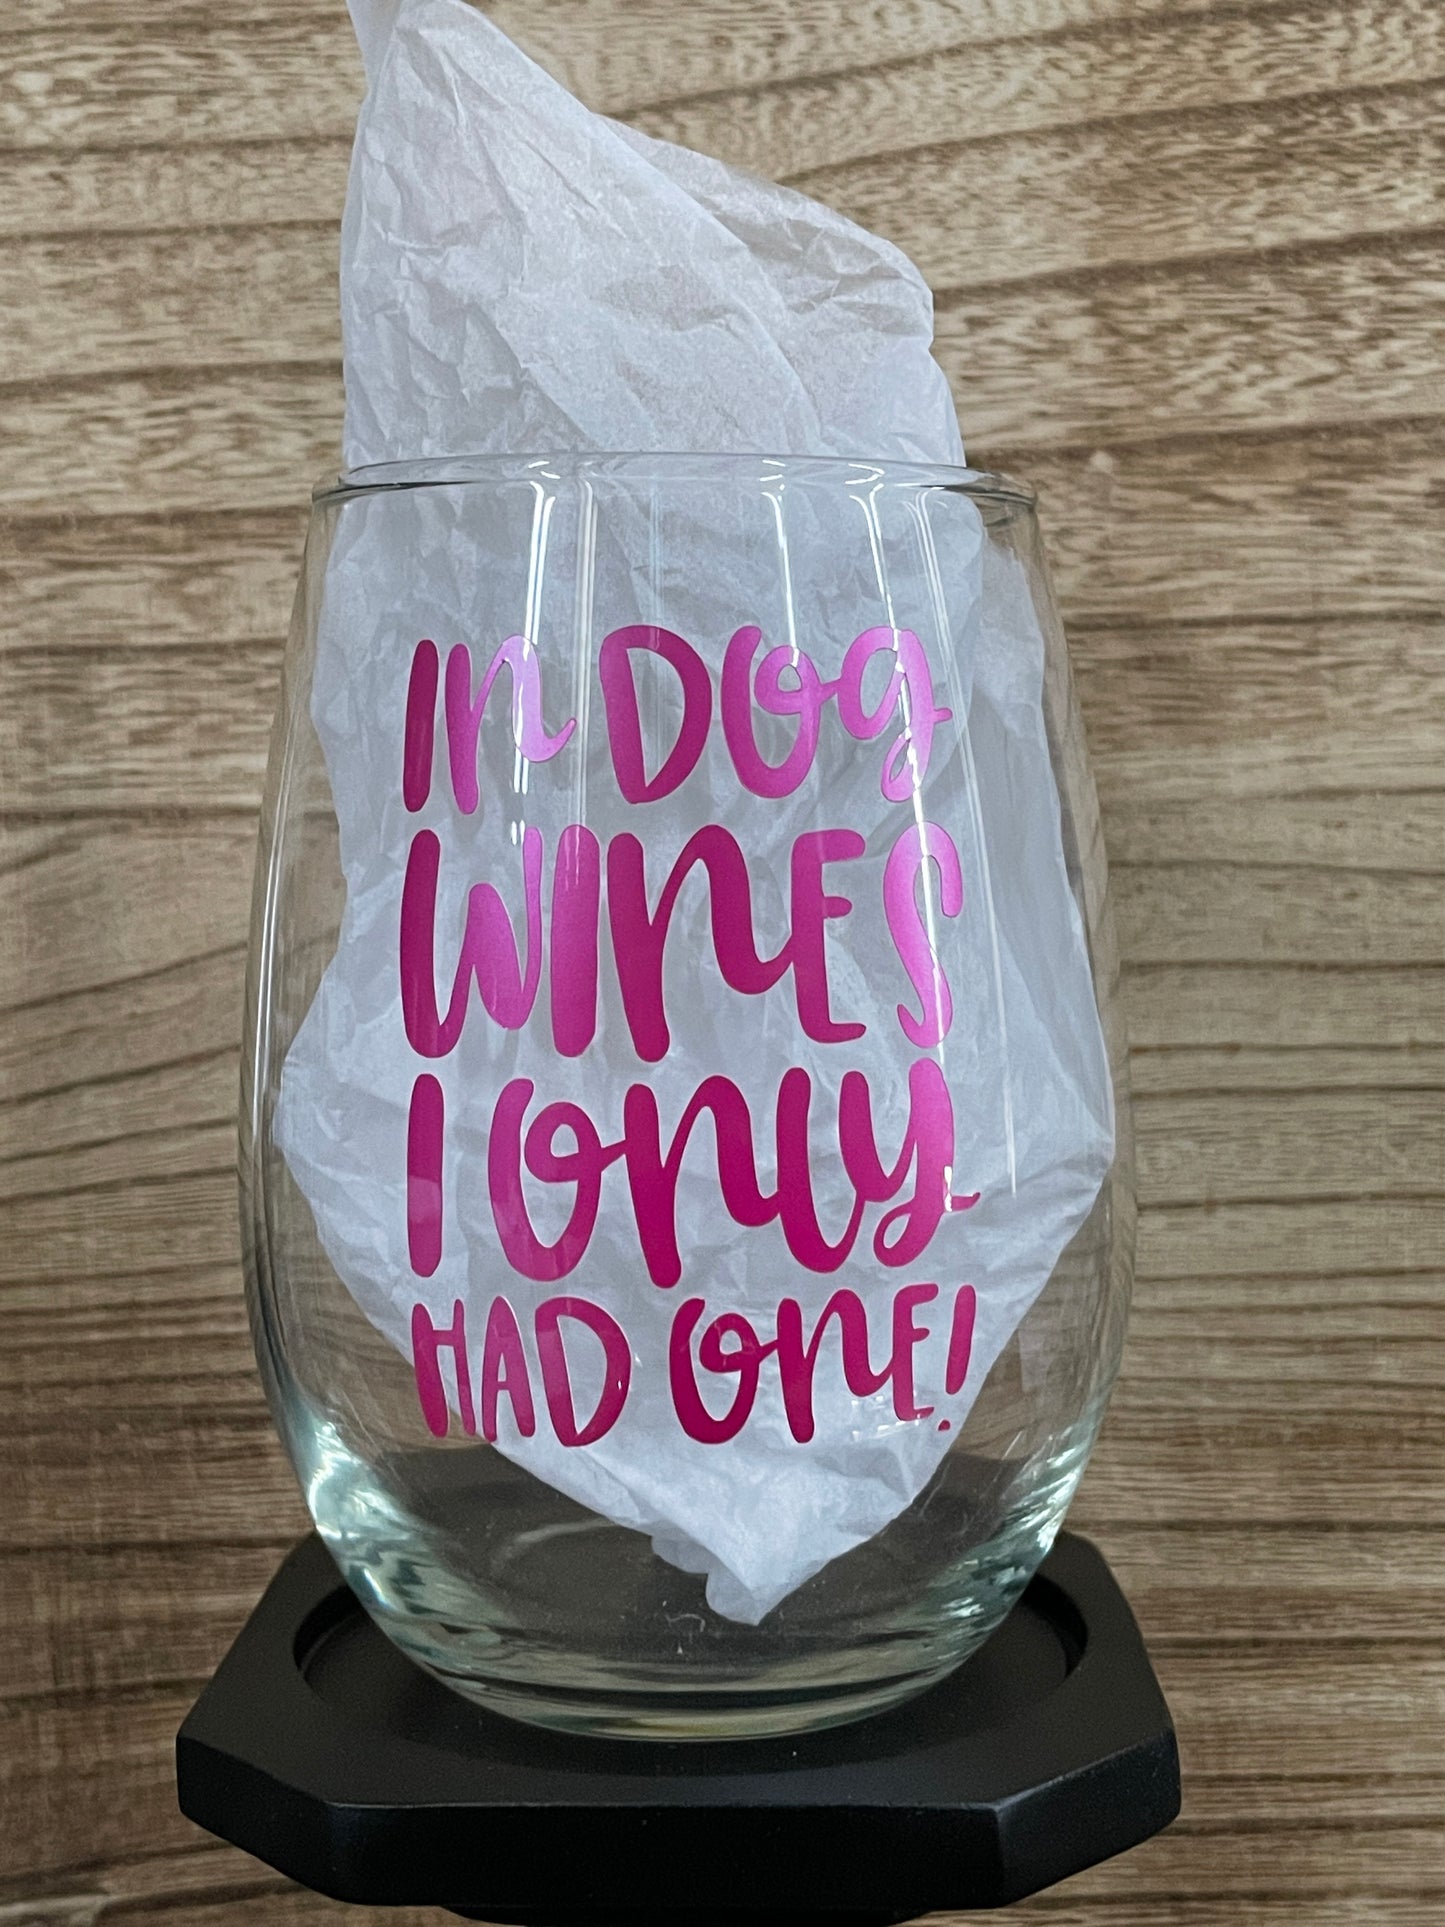 In DOG wines I only had one Wine Glass